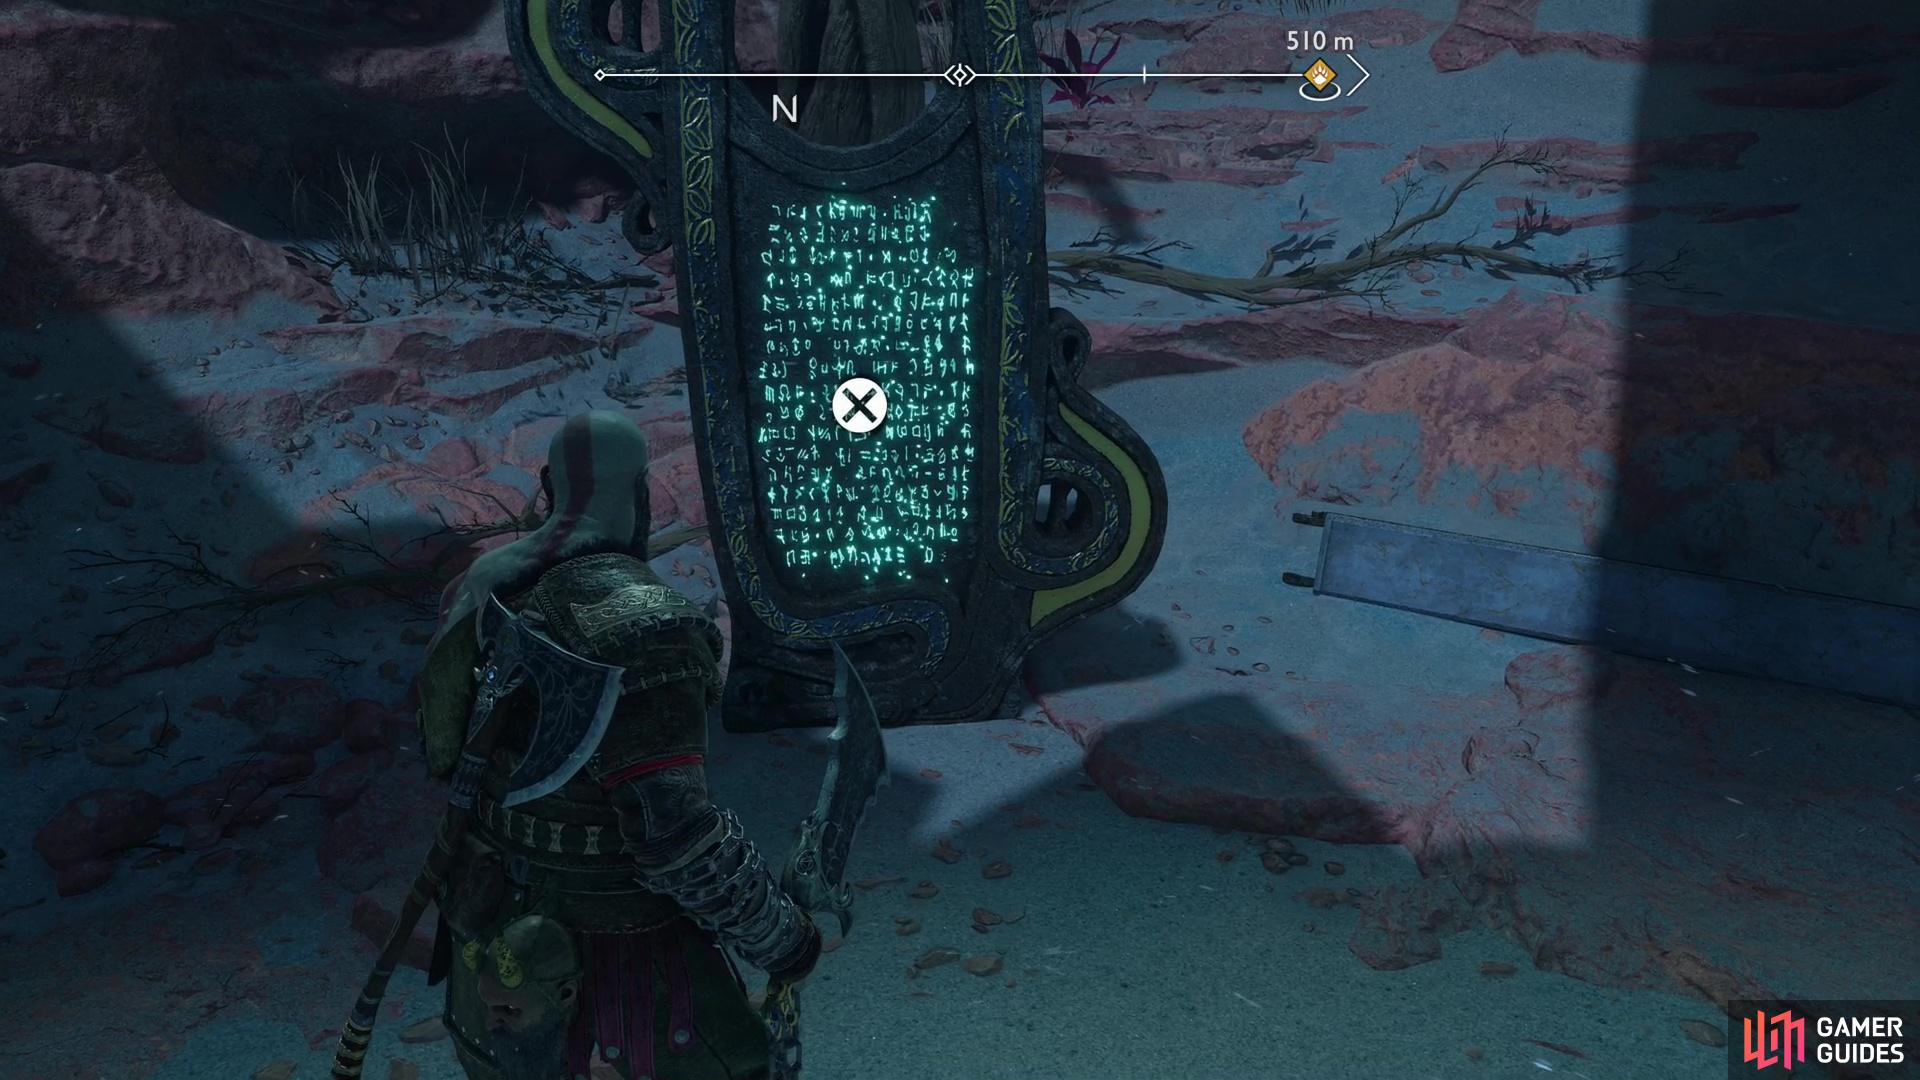 you can also find the Lore Marker "The Tower's Purpose".